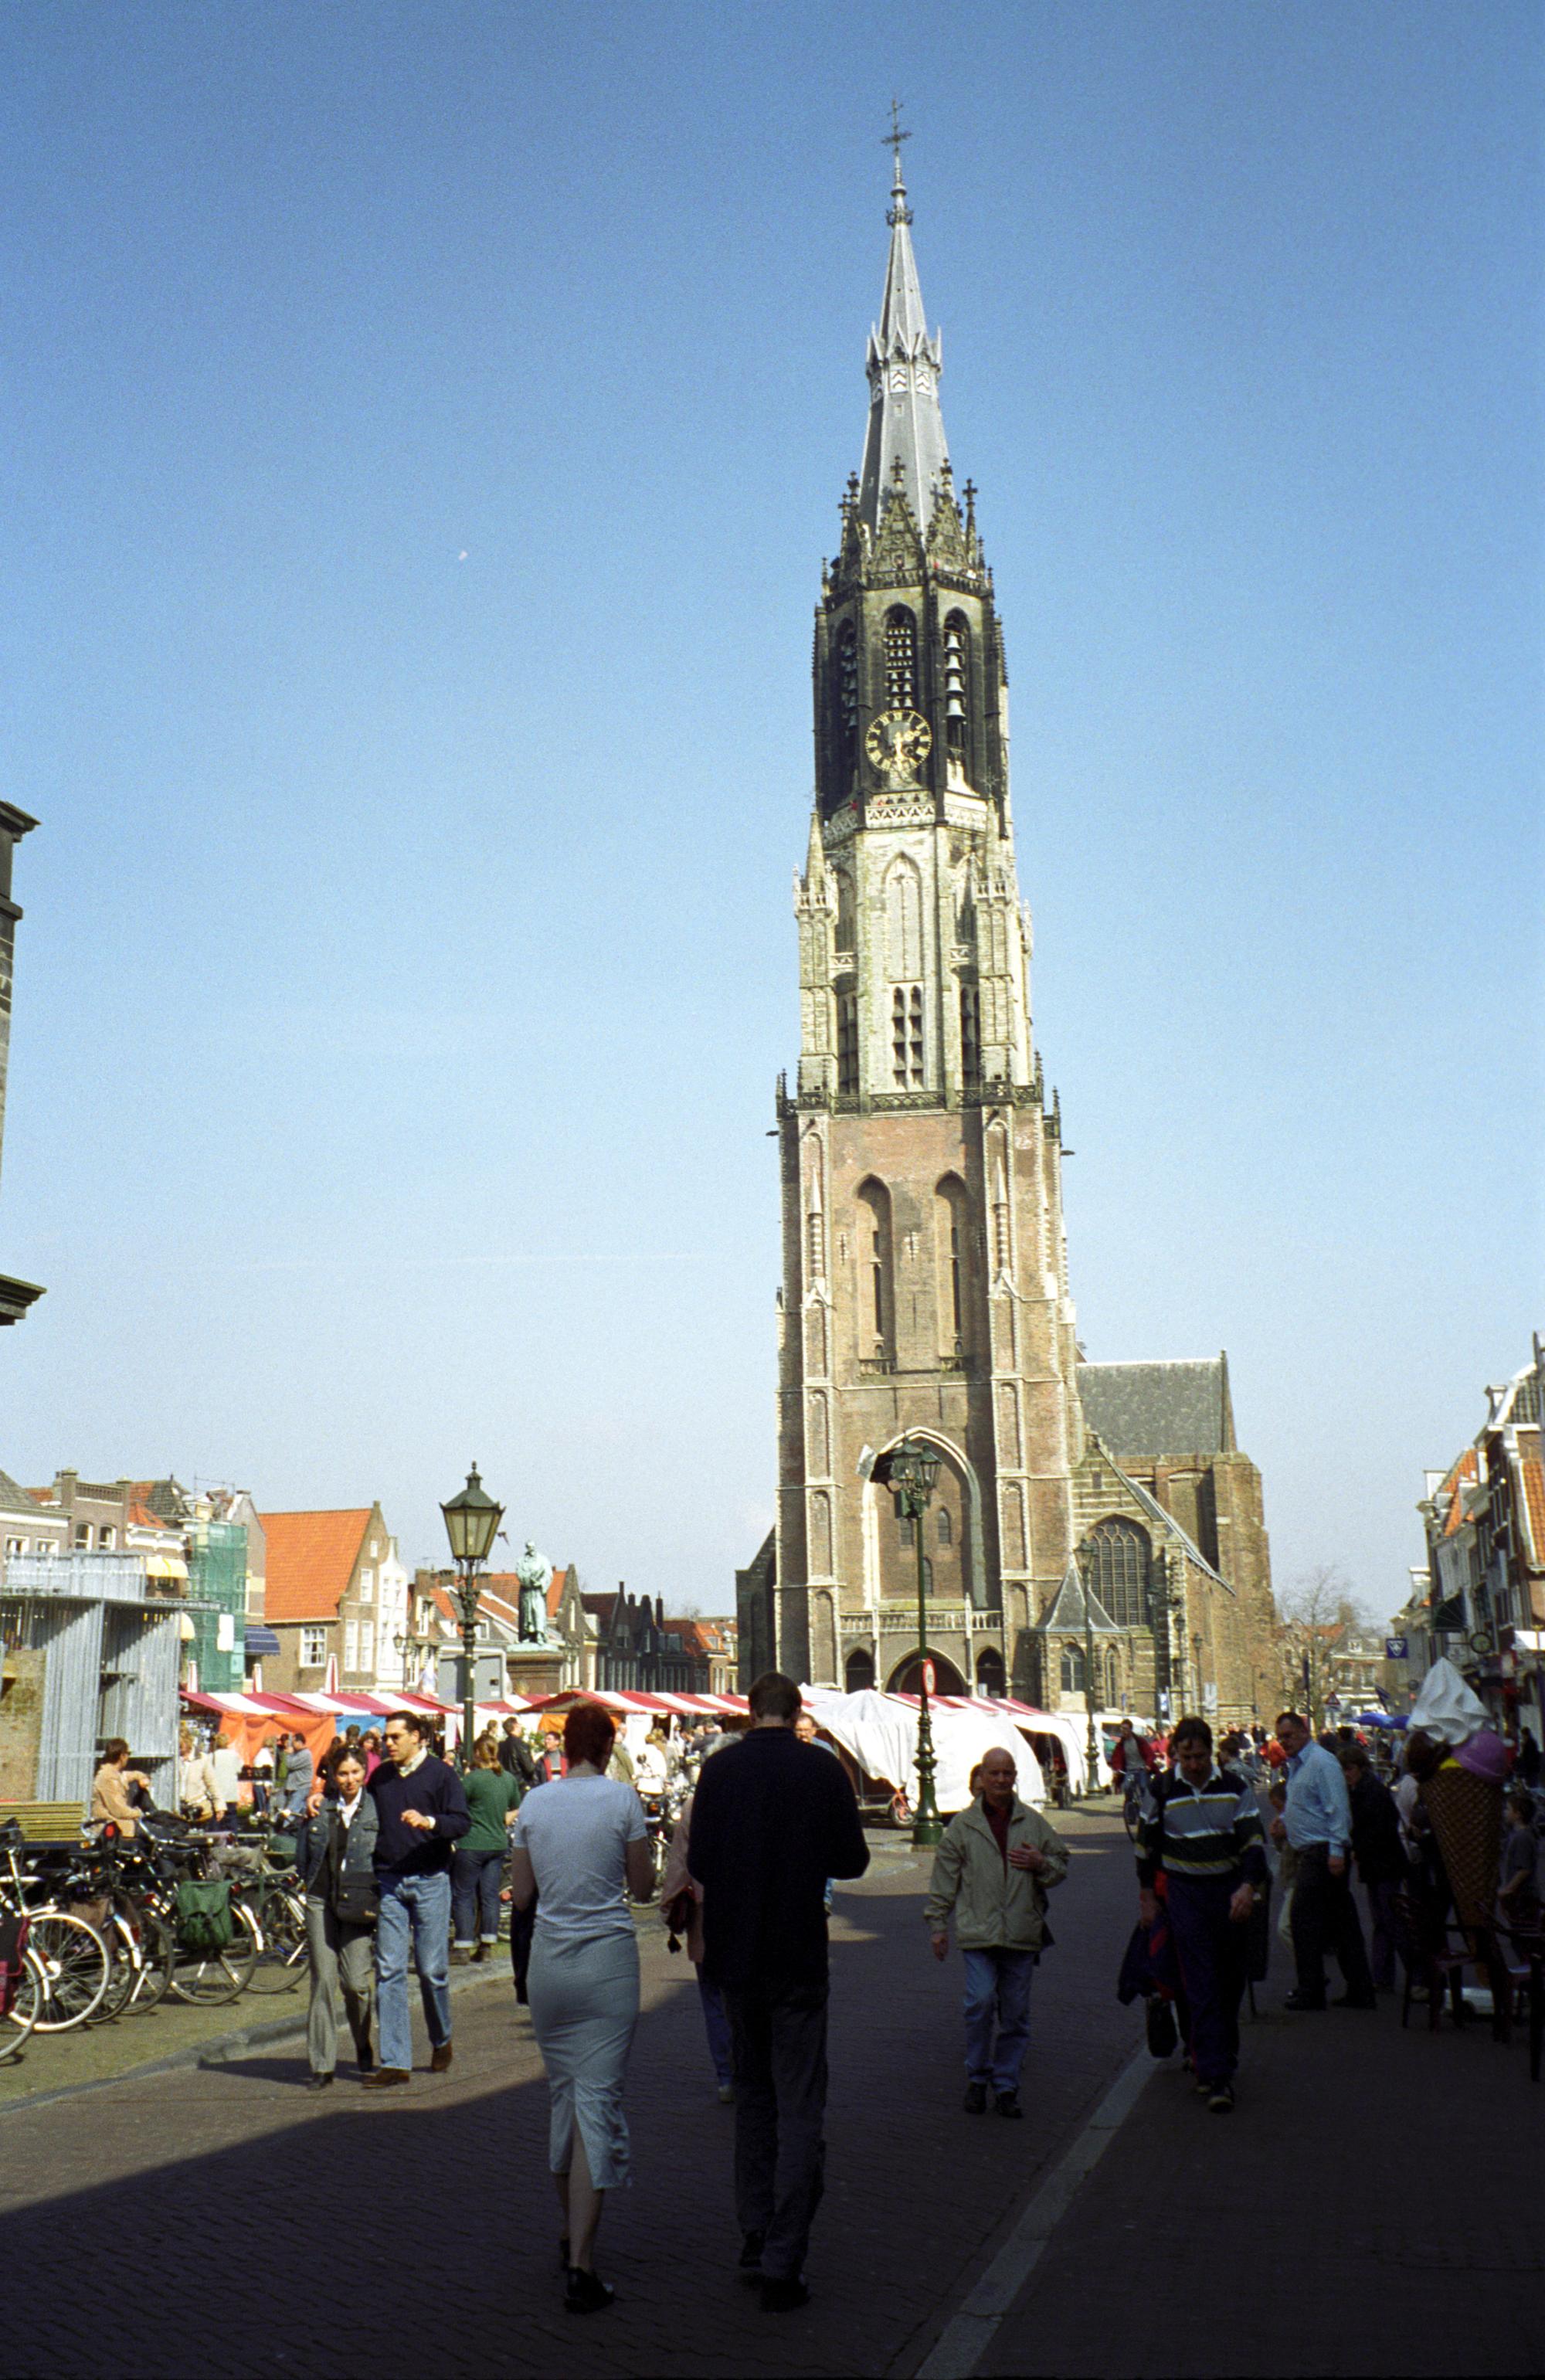 The Netherlands - Church Tower